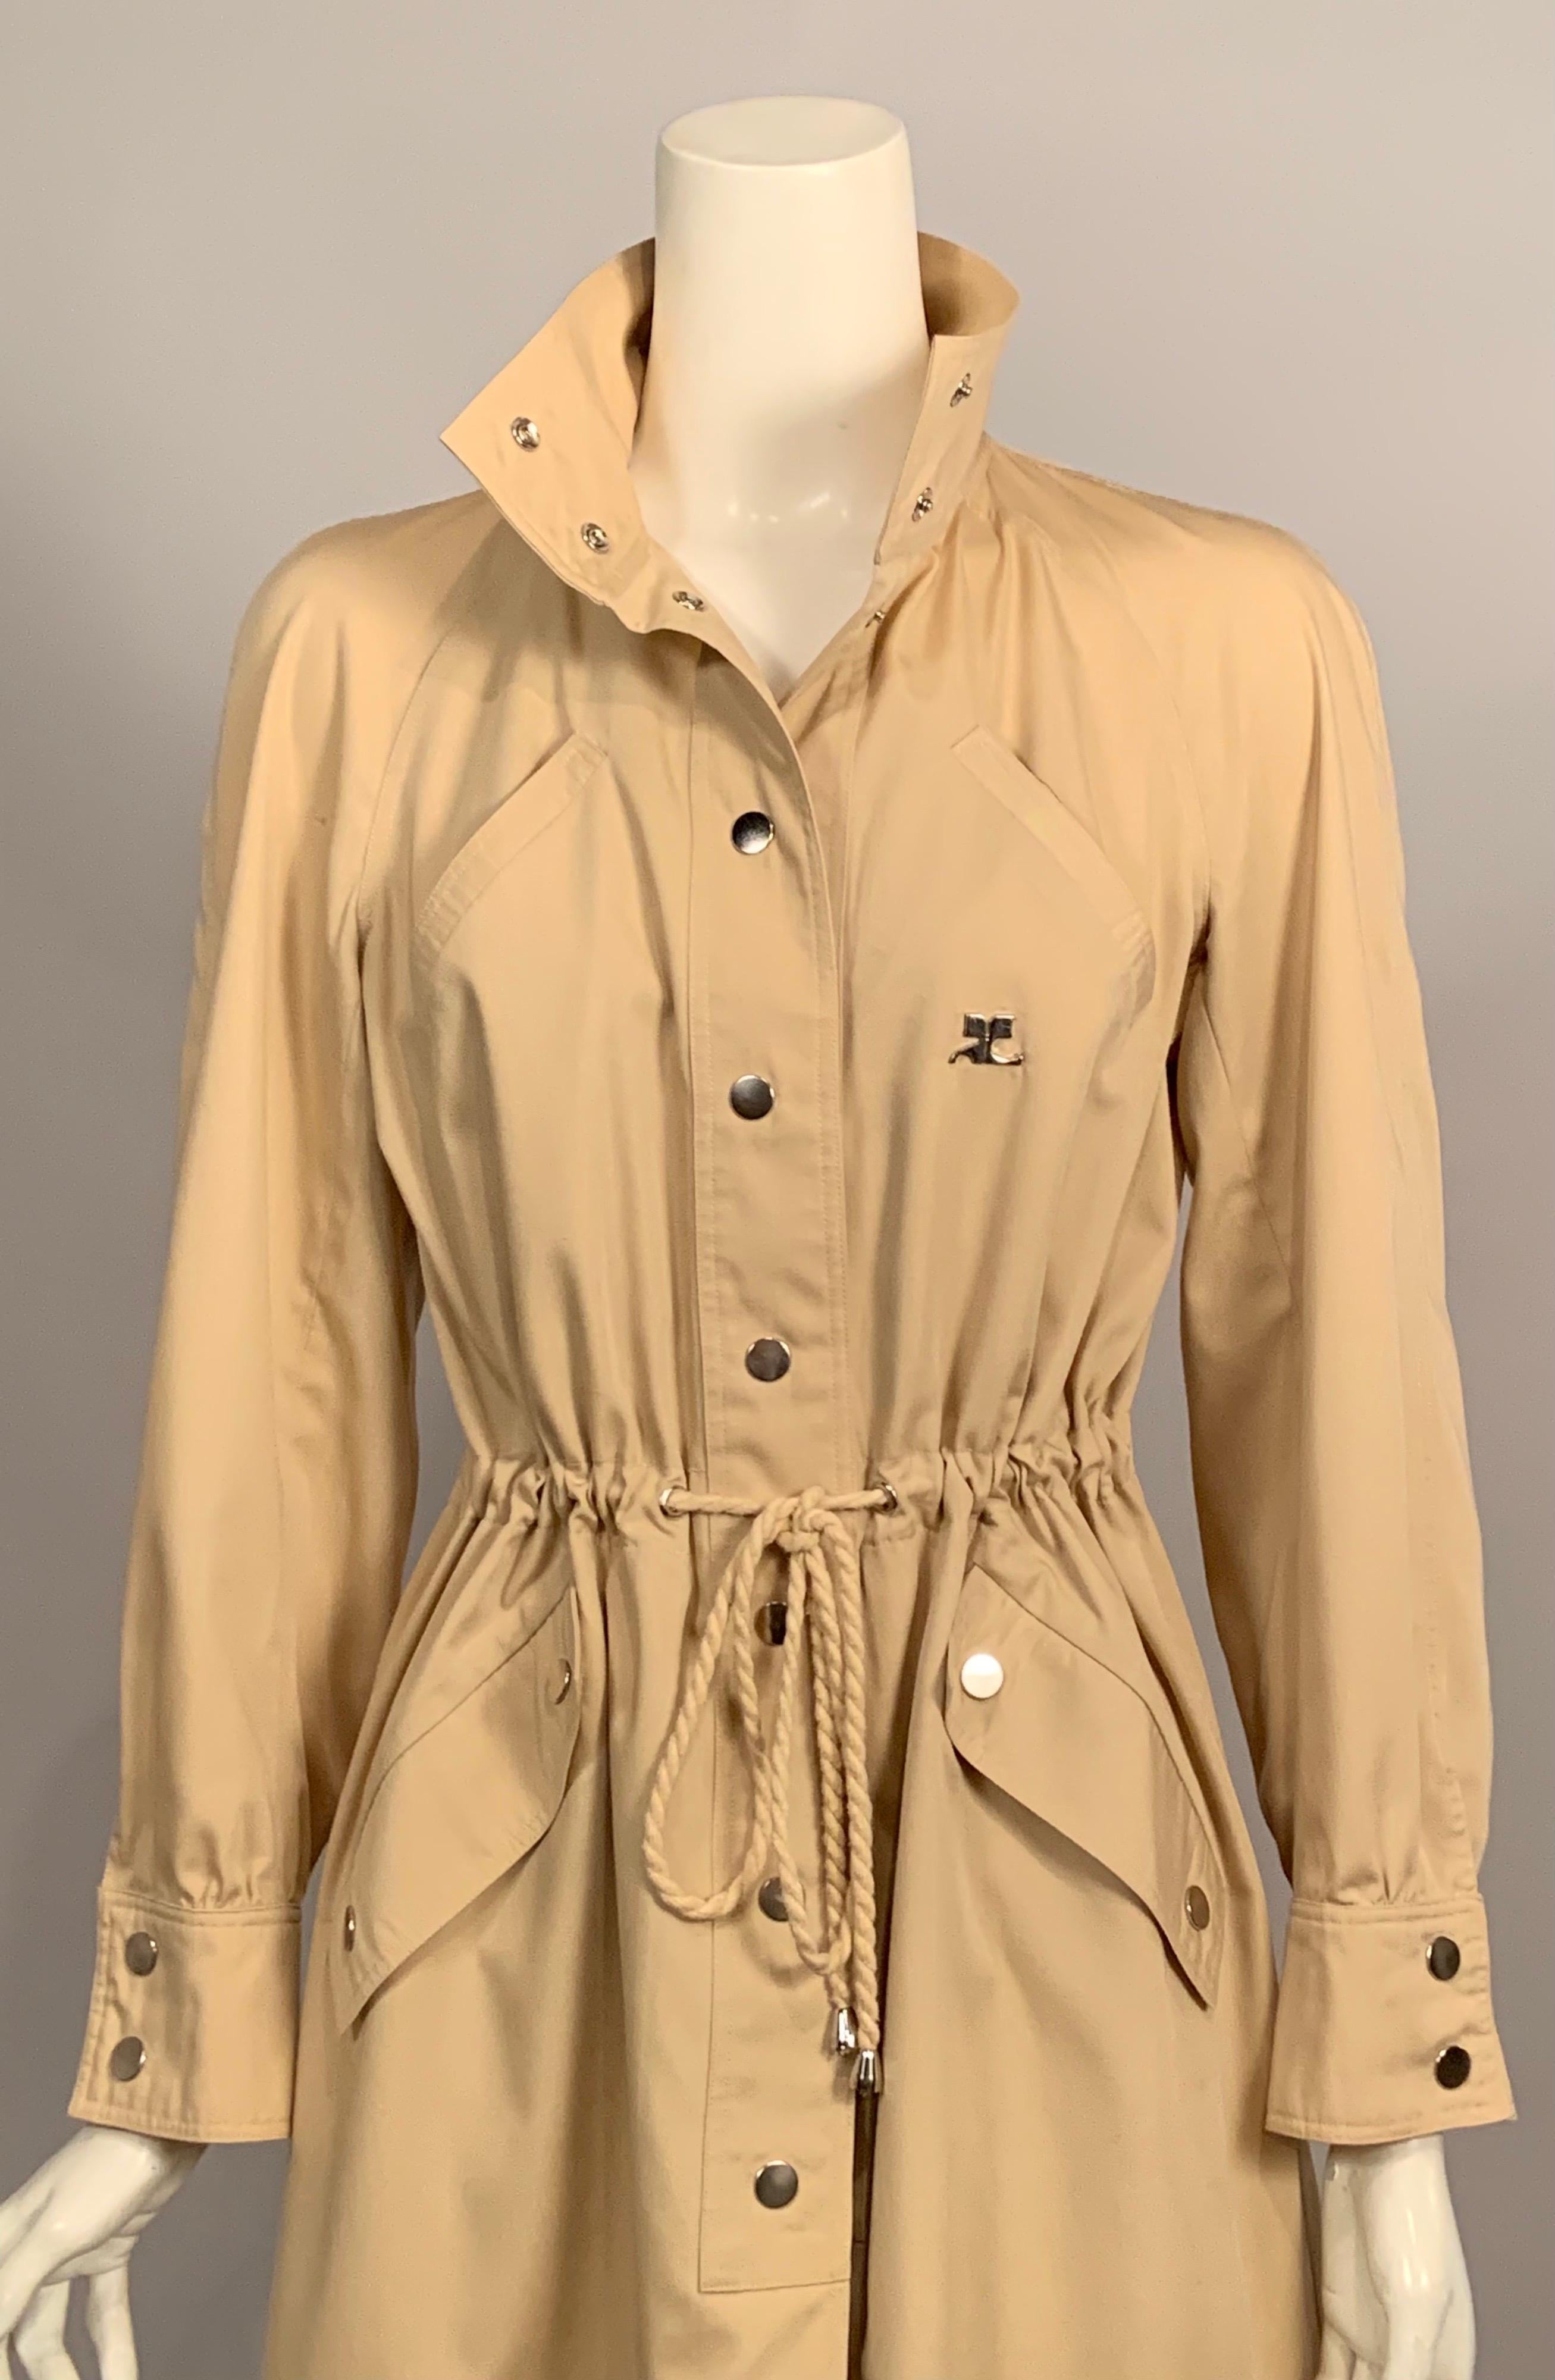 Rain or shine this tan cotton coat designed by Andre Courreges in the 1970's is just perfect.  The funnel neck can be closed with two snaps. There are two breast pockets placed on the diagonal above a drawstring waist. There are two more diagonal